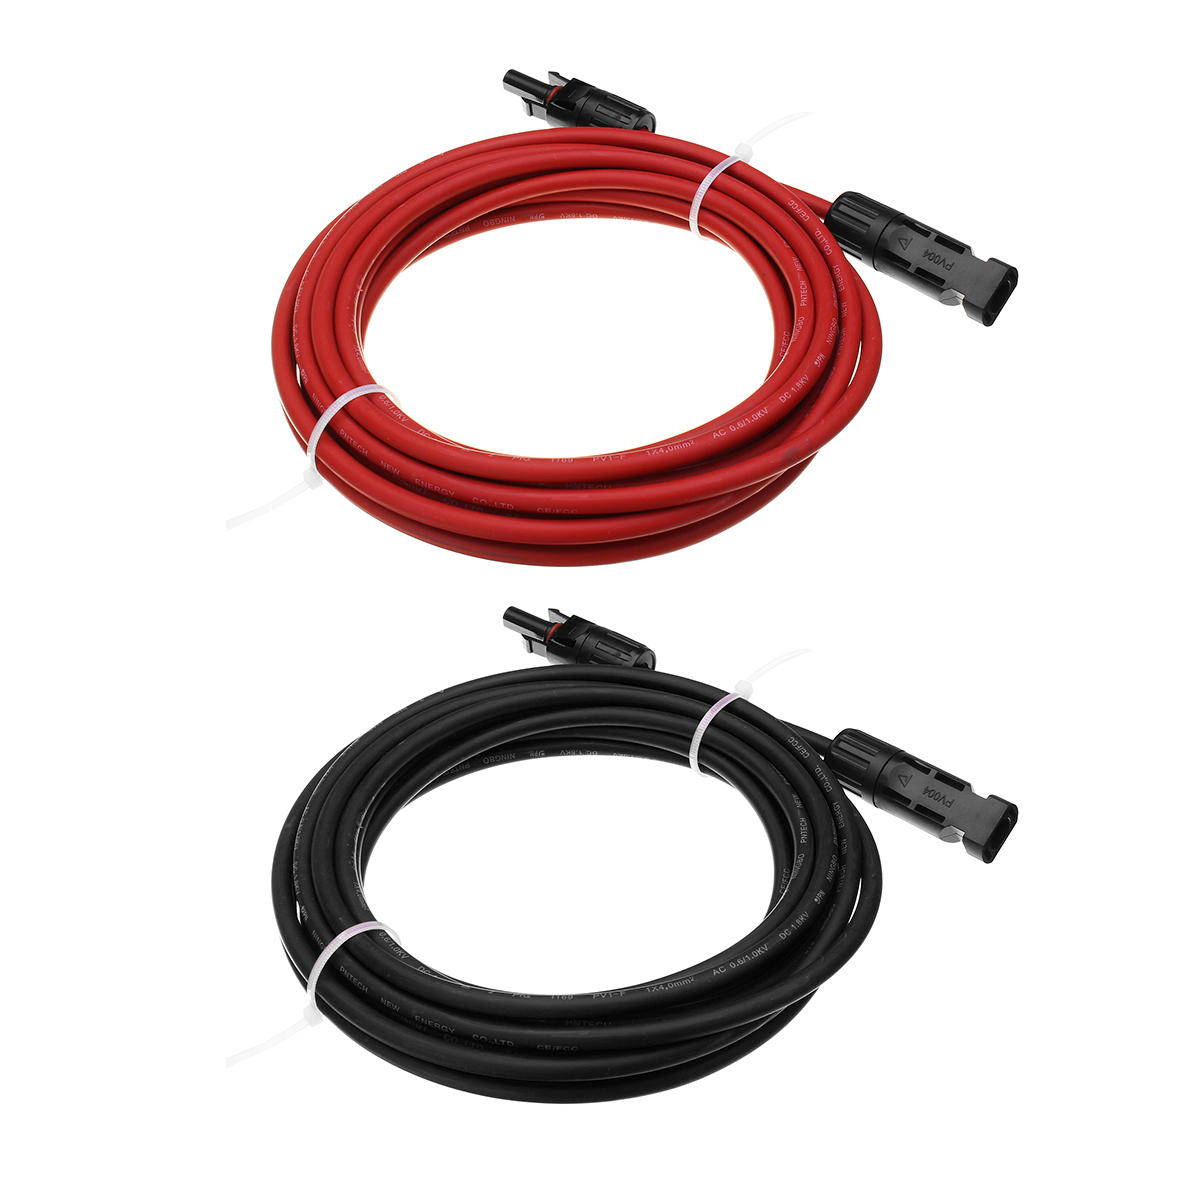 5m length awg12 black or red mc4 connector solar panel extension cable wire Sale